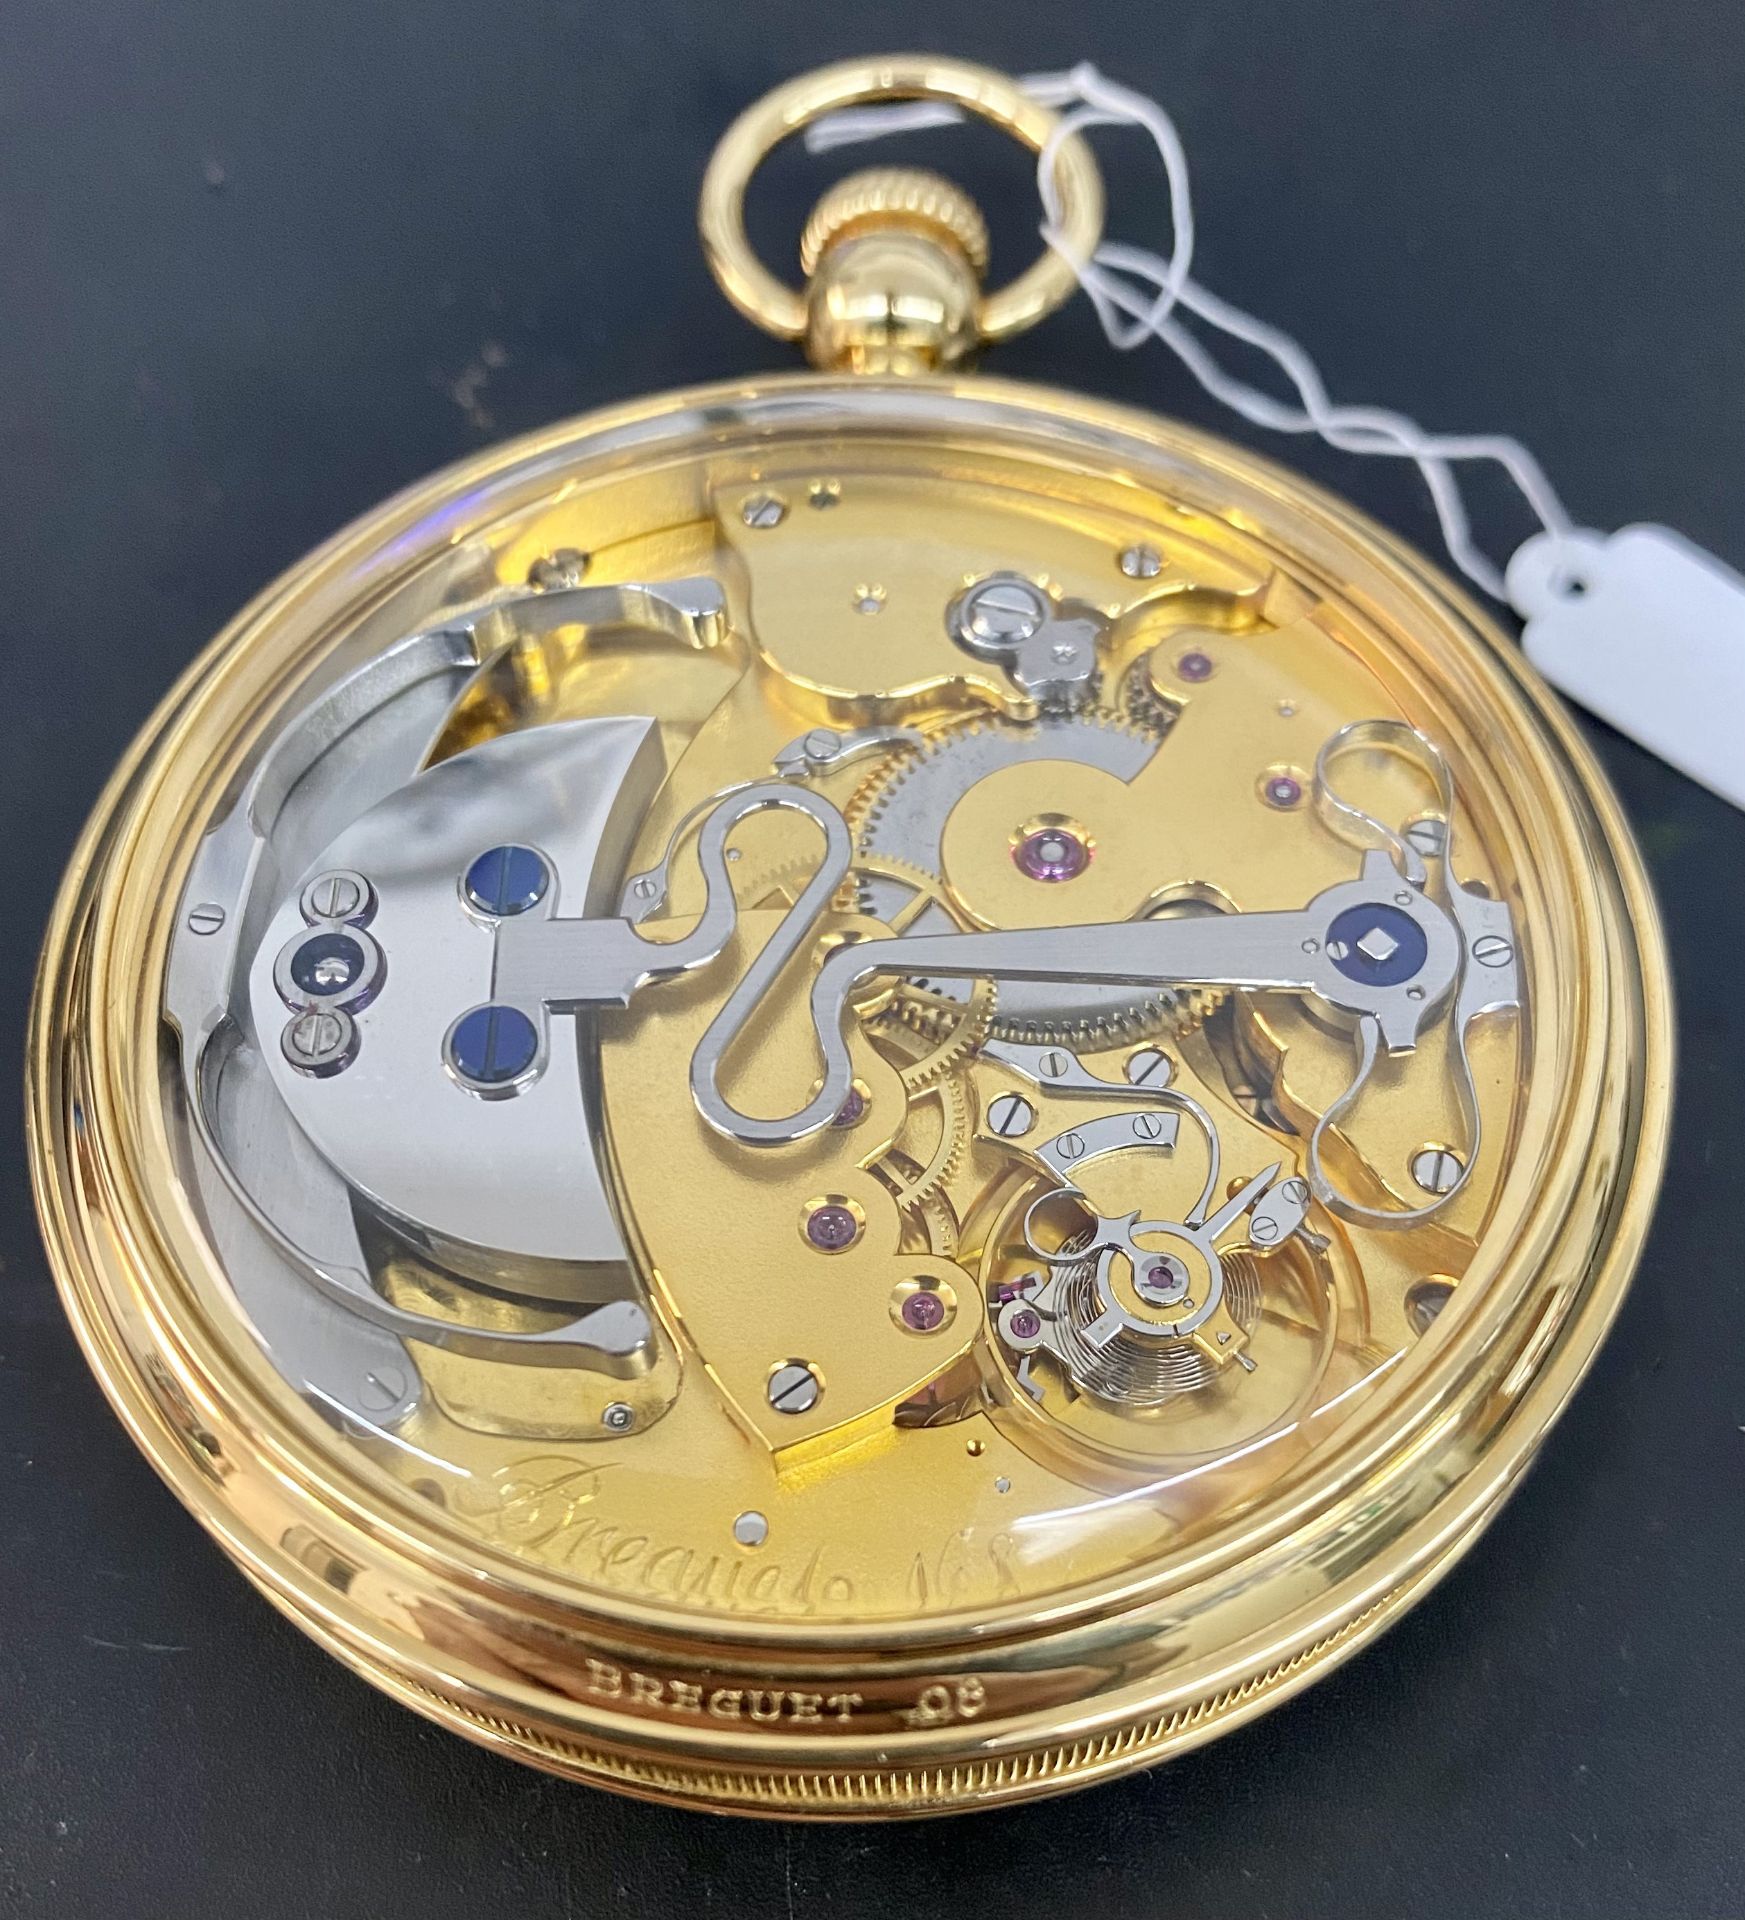 Breguet: Collectable Set of 2 so-called "Souscriptions Watches" - Image 11 of 13